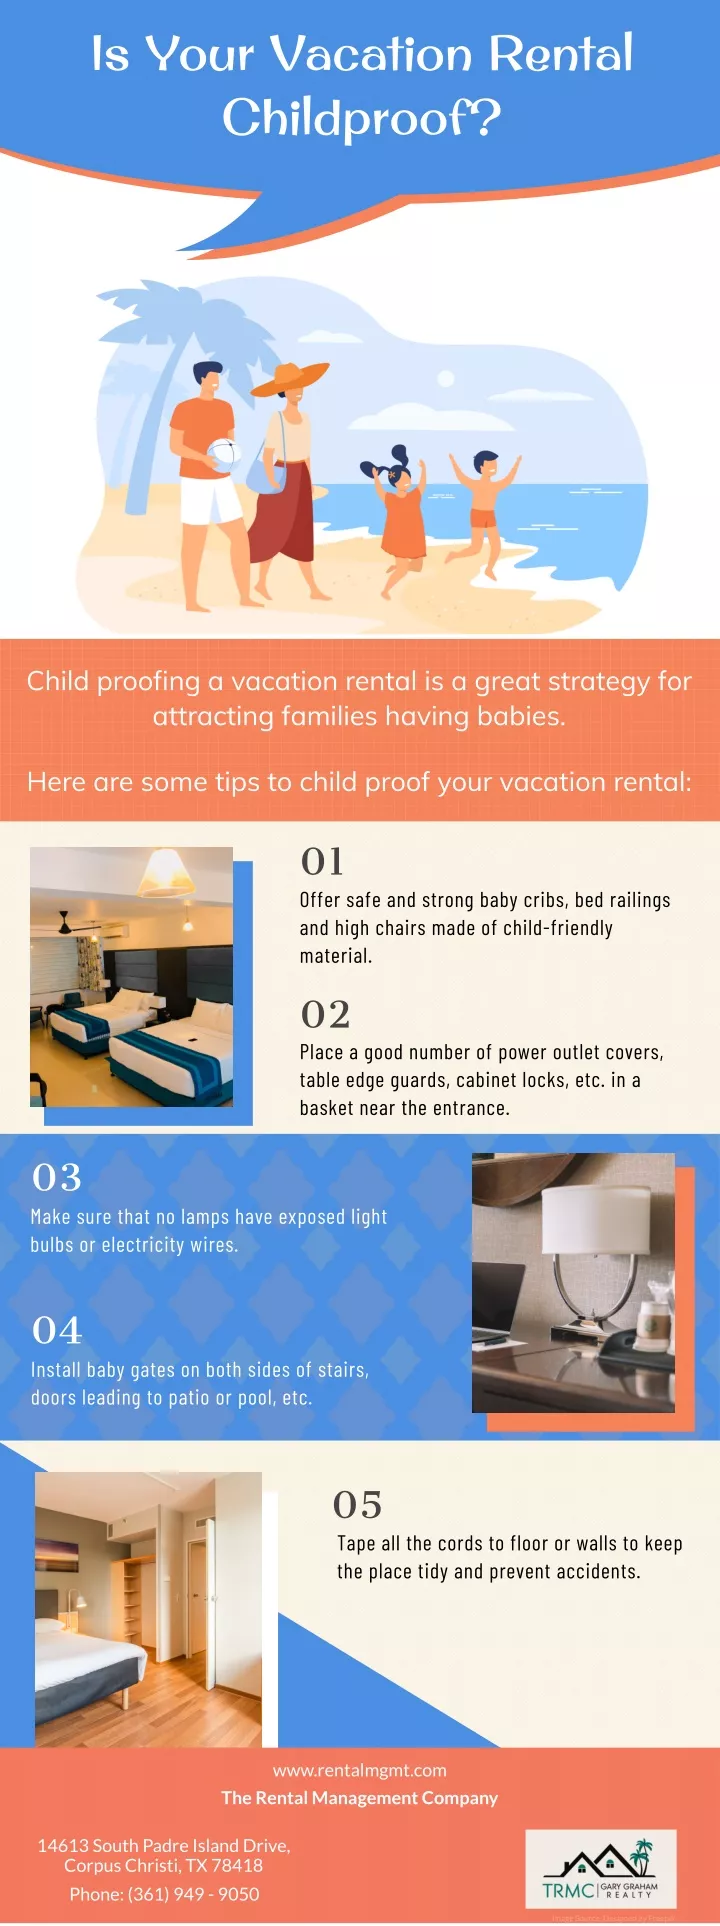 is your vacation rental childproof